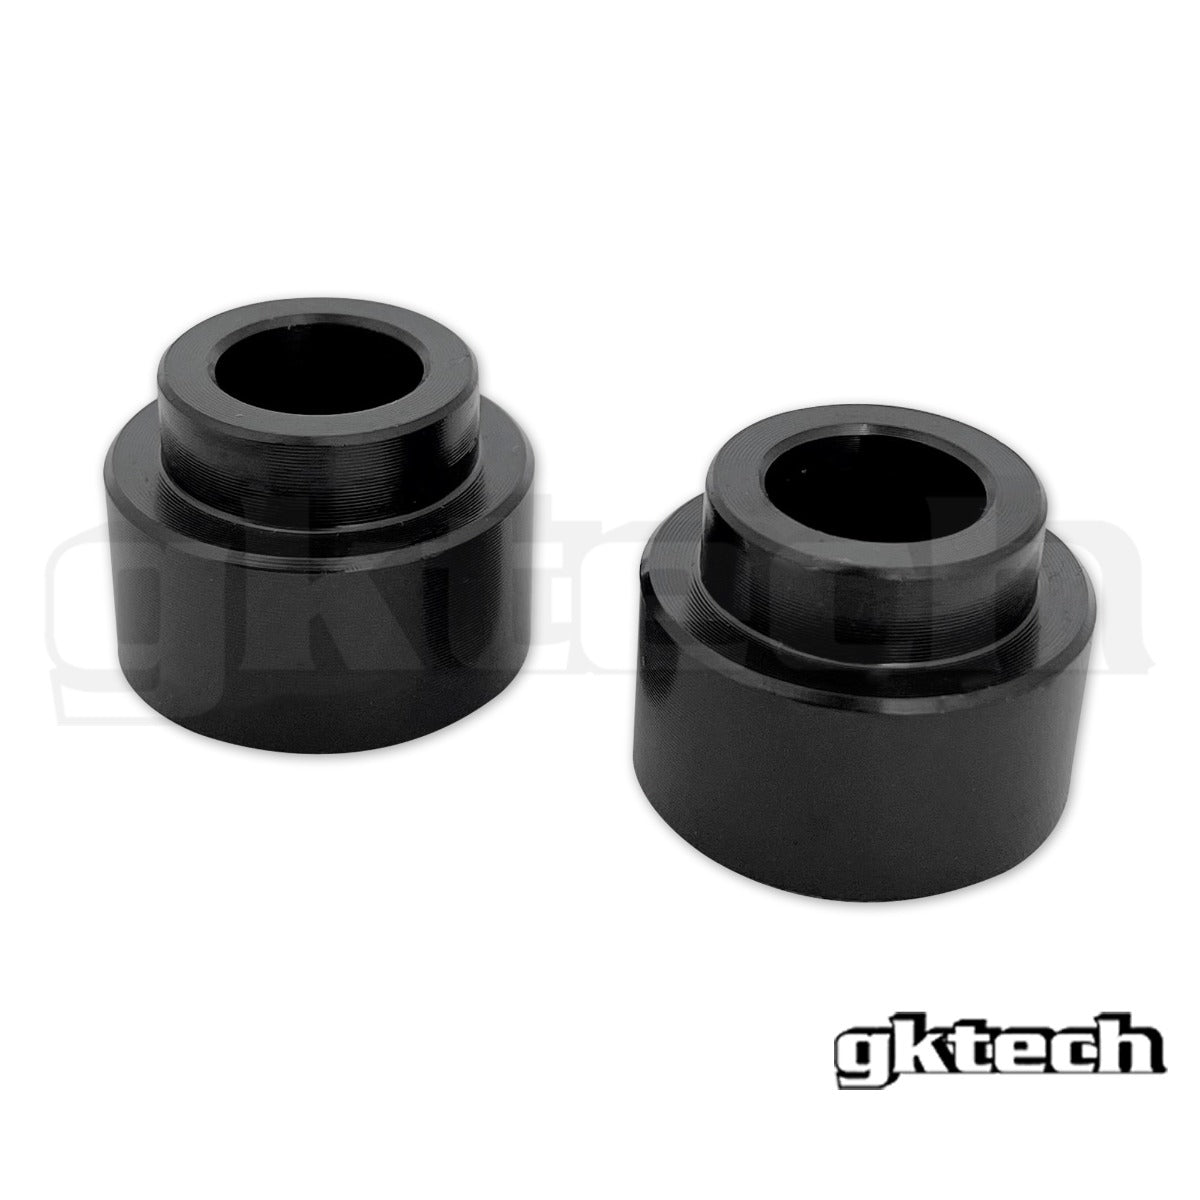 GKTECH 50mm rose joint spacers (pair)